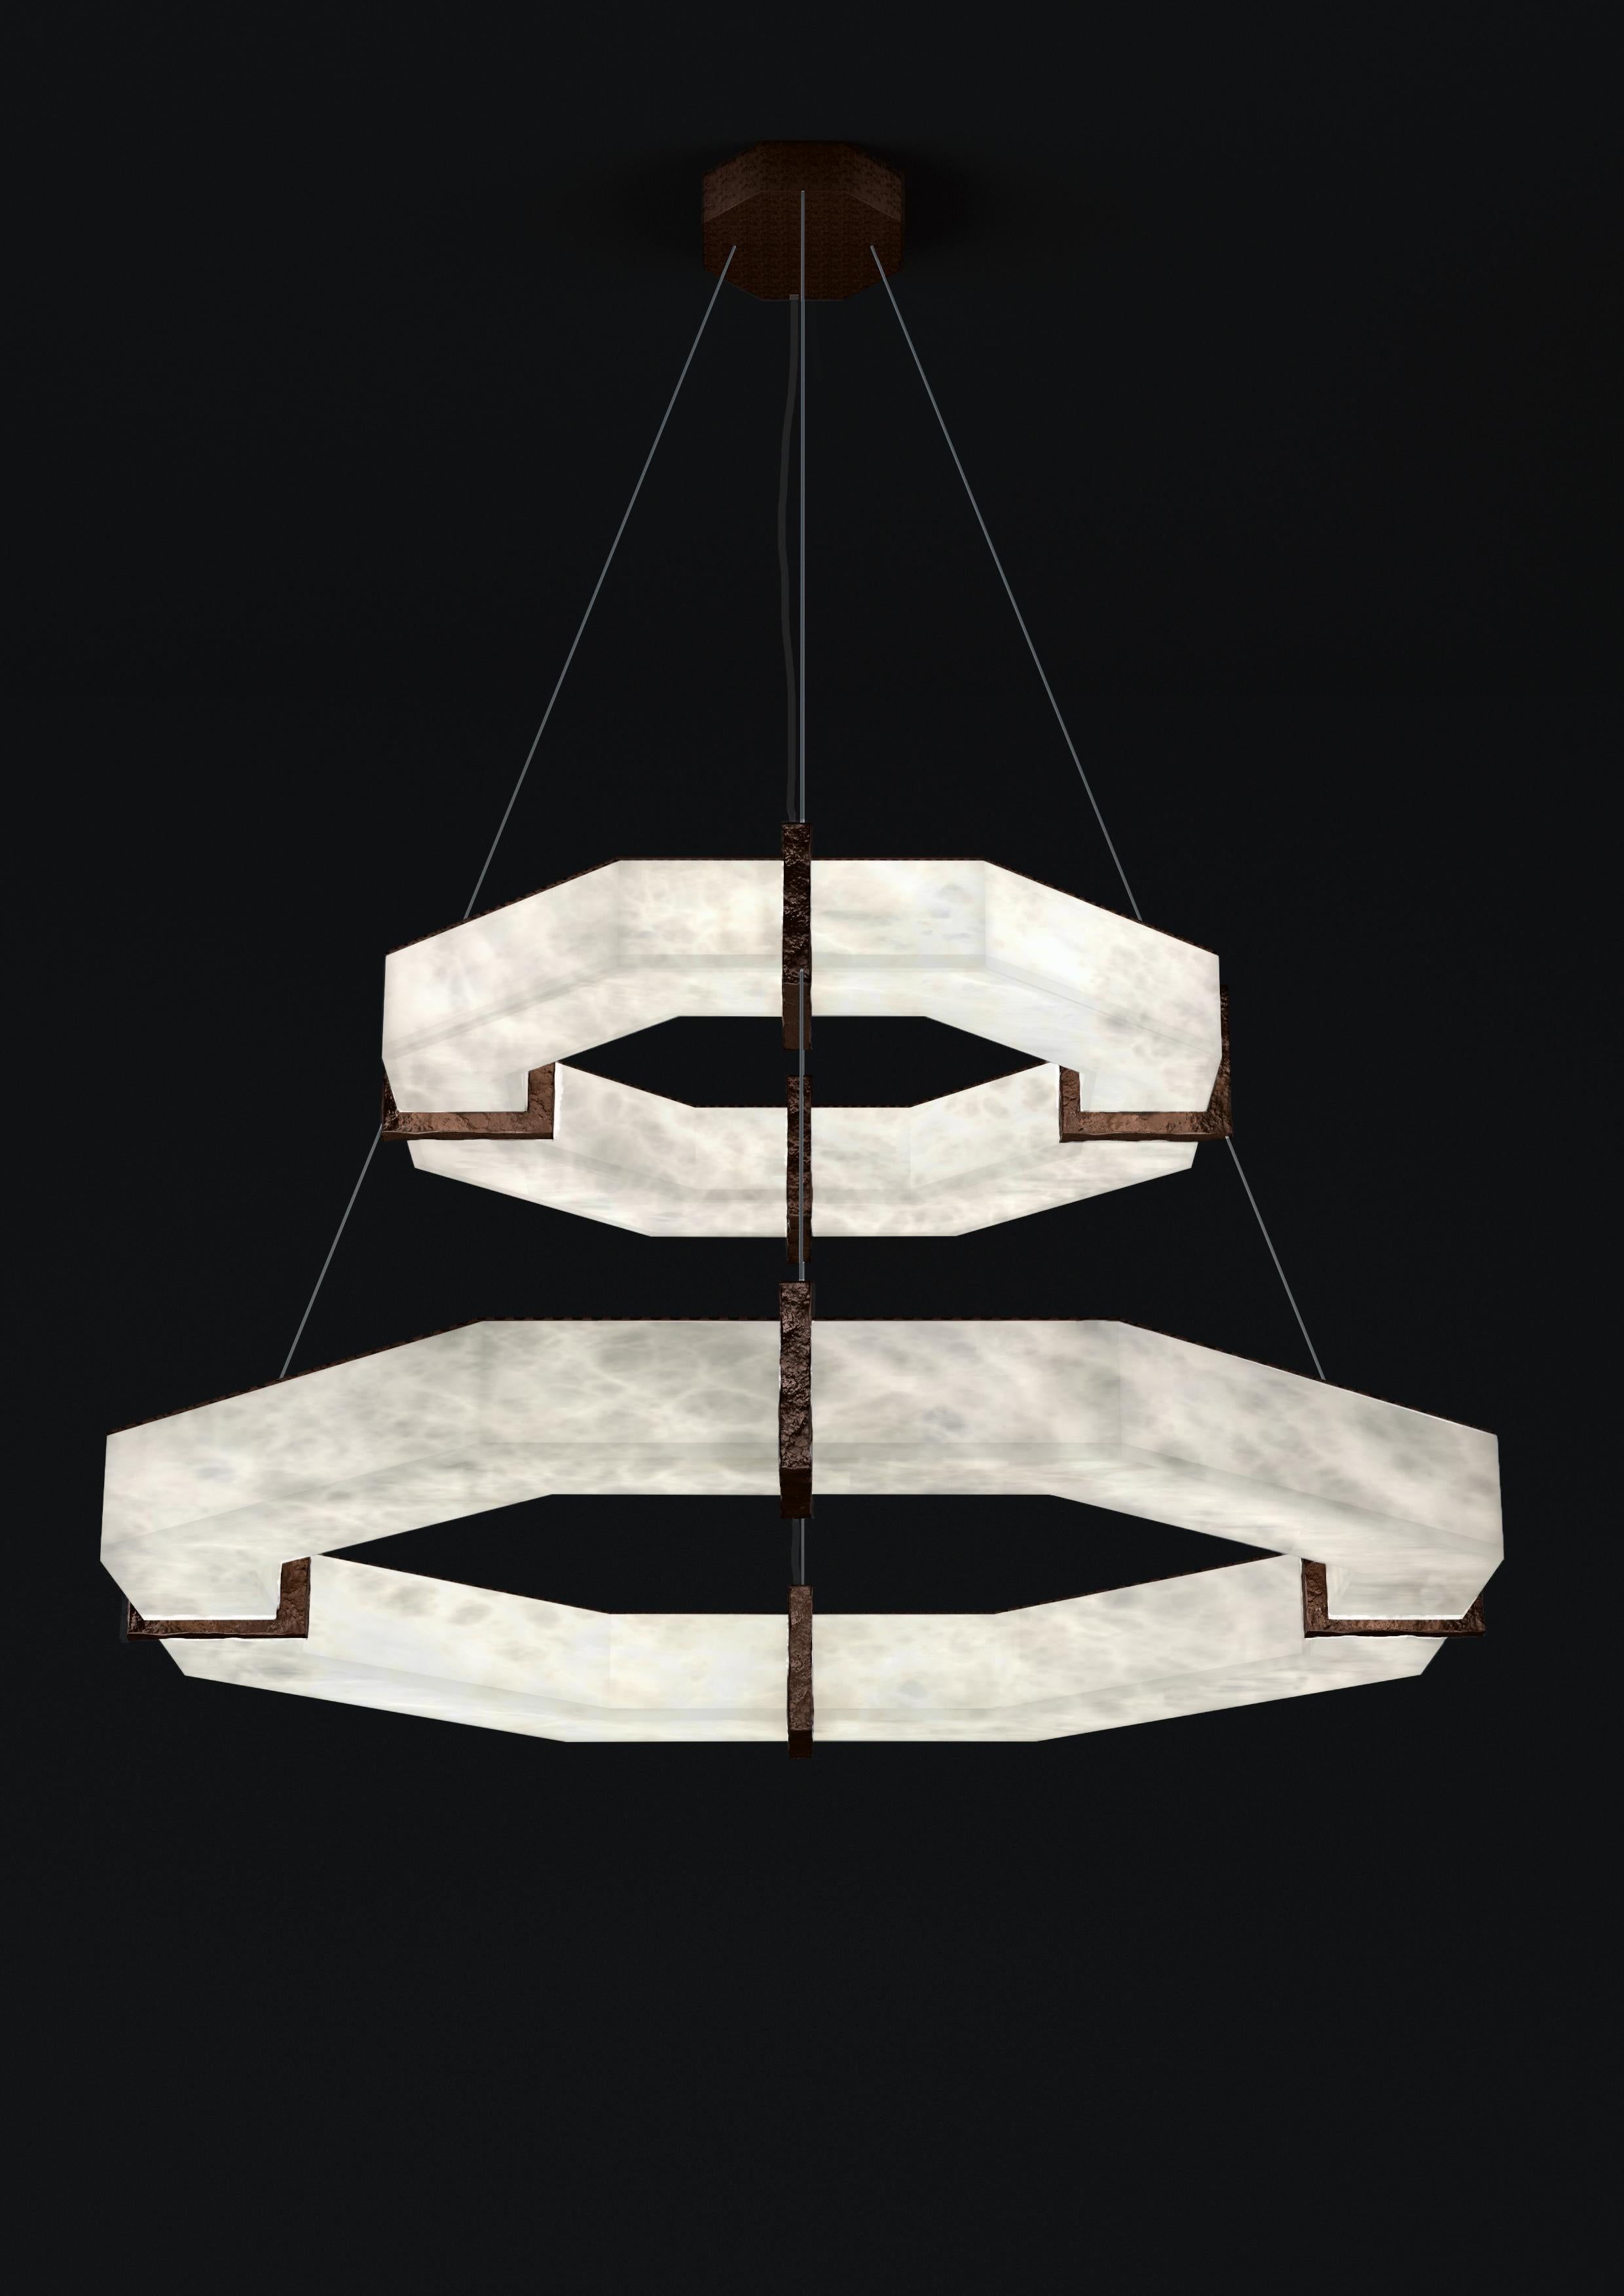 Efesto Ruggine Of Florence Metal Double Pendant Lamp by Alabastro Italiano
Dimensions: D 80.5 x W 80.5 x H 36.5 cm.
Materials: White alabaster and metal.

Available in different finishes: Shiny Silver, Bronze, Brushed Brass, Ruggine of Florence,